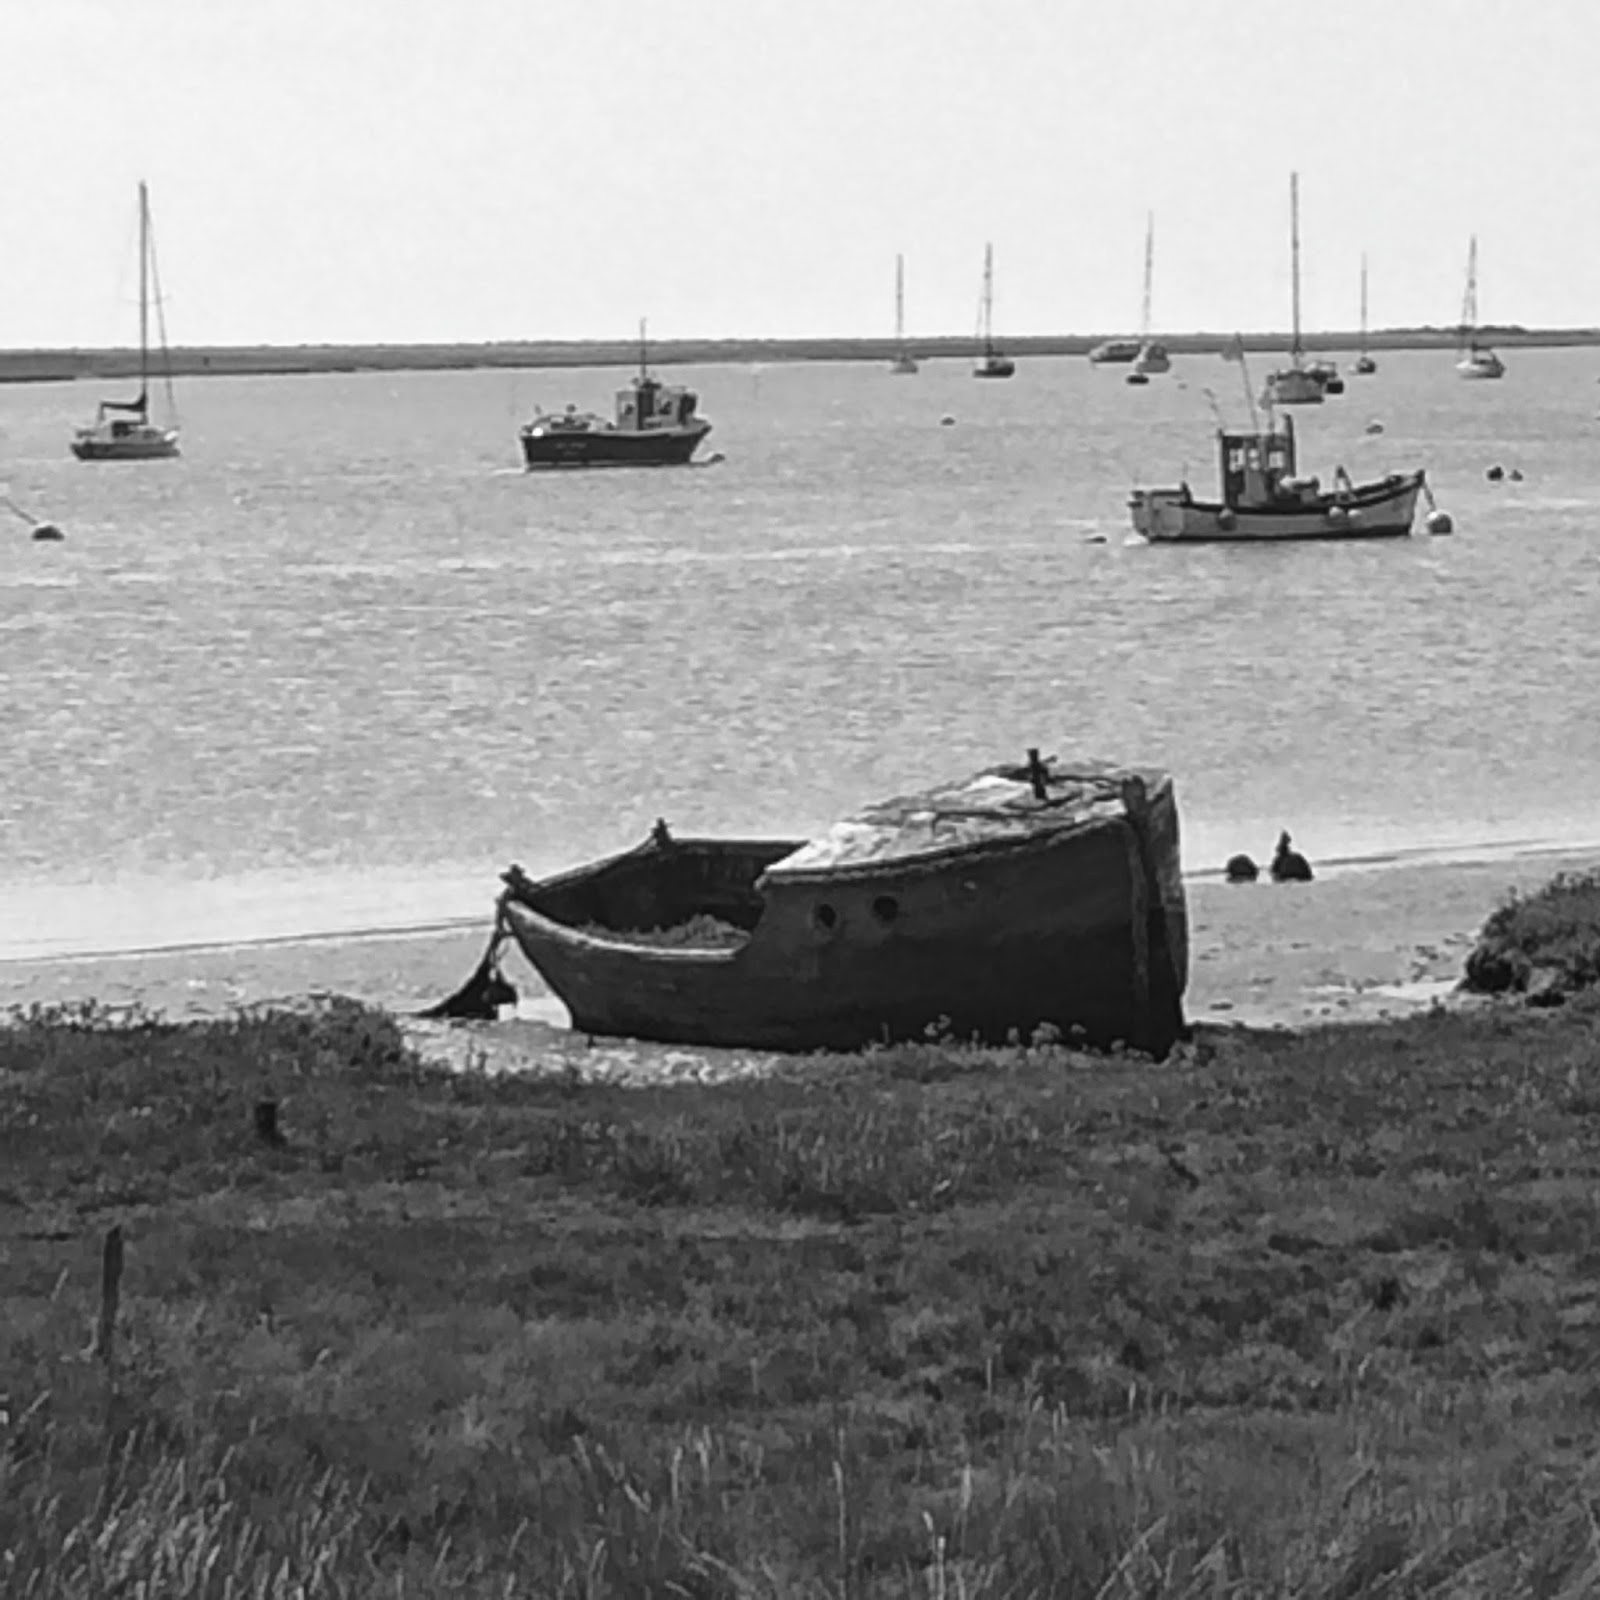 beached boat at Orford in Suffolk, UK